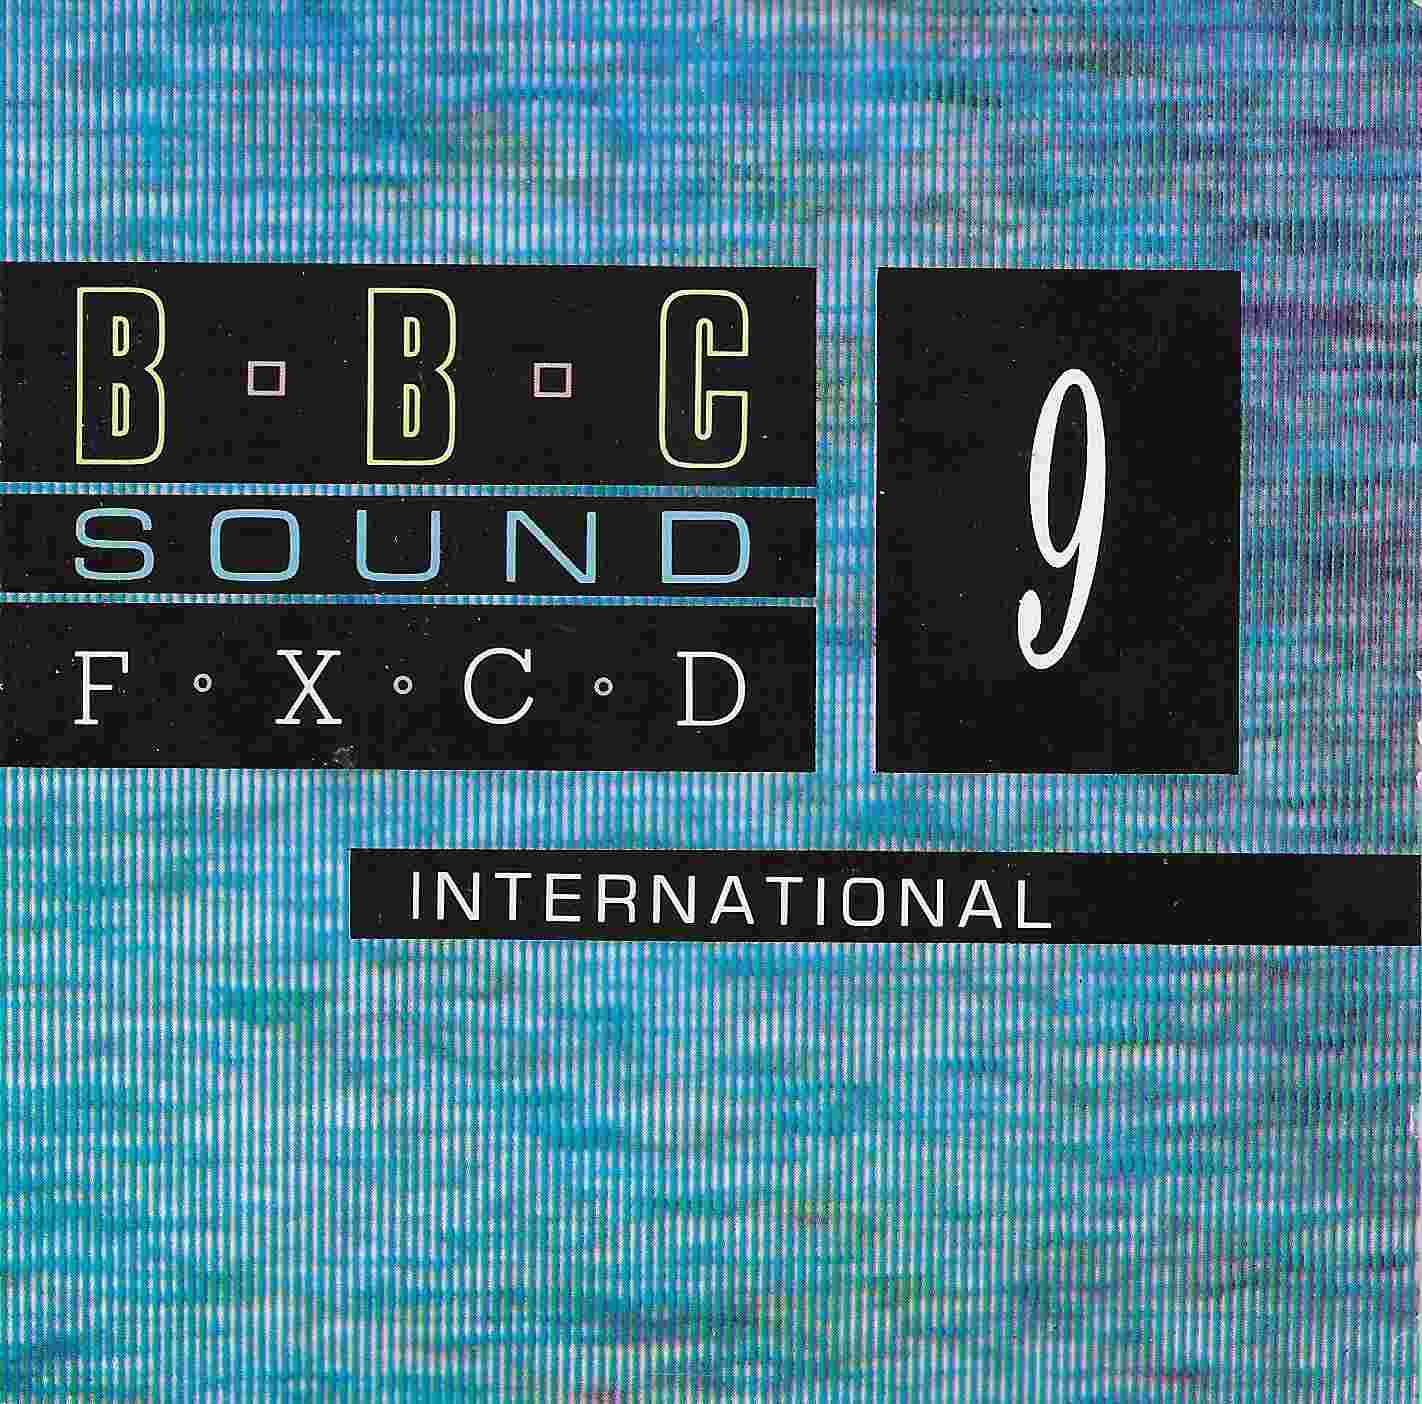 Picture of BBCCD SFX009 International by artist Various from the BBC records and Tapes library